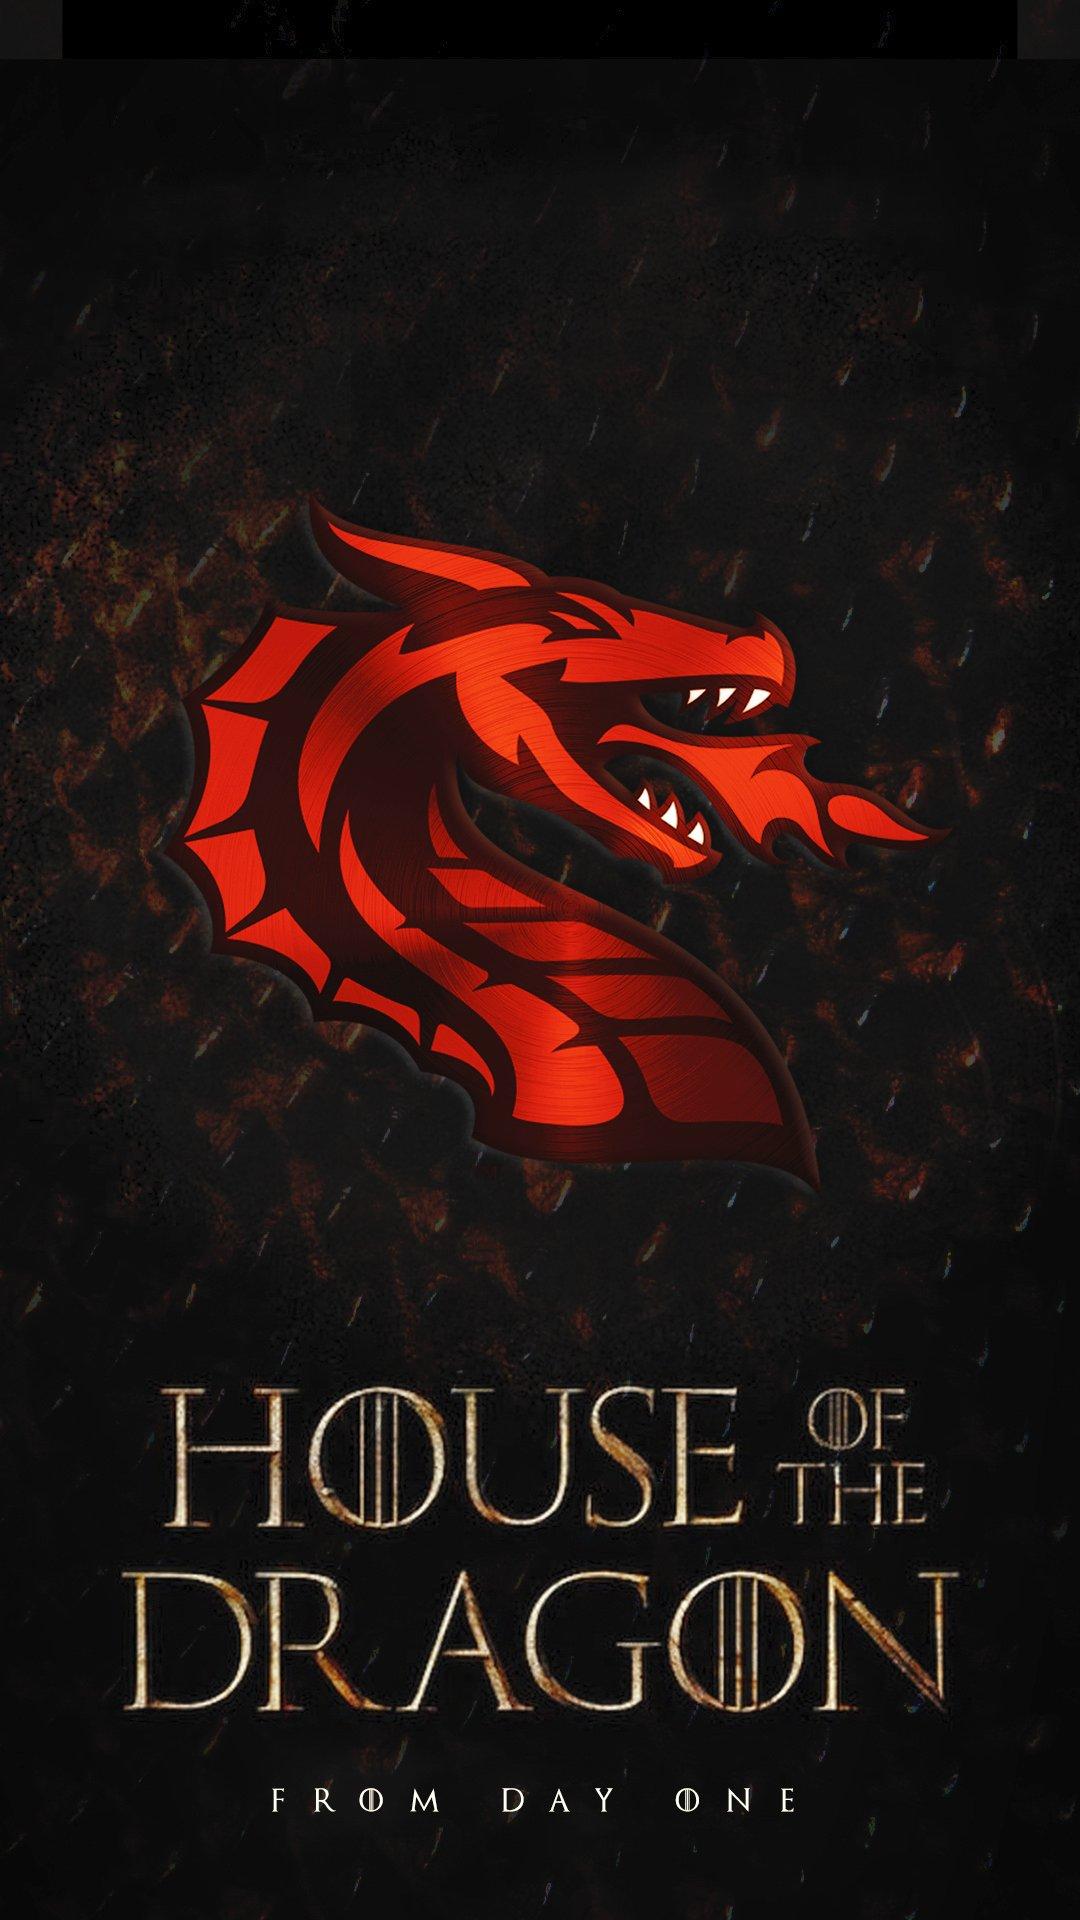 House of the dragon x reader. House of the Dragon драконы. House of the Dragon заставка. House of the Dragon надпись. House of Dragon арт.